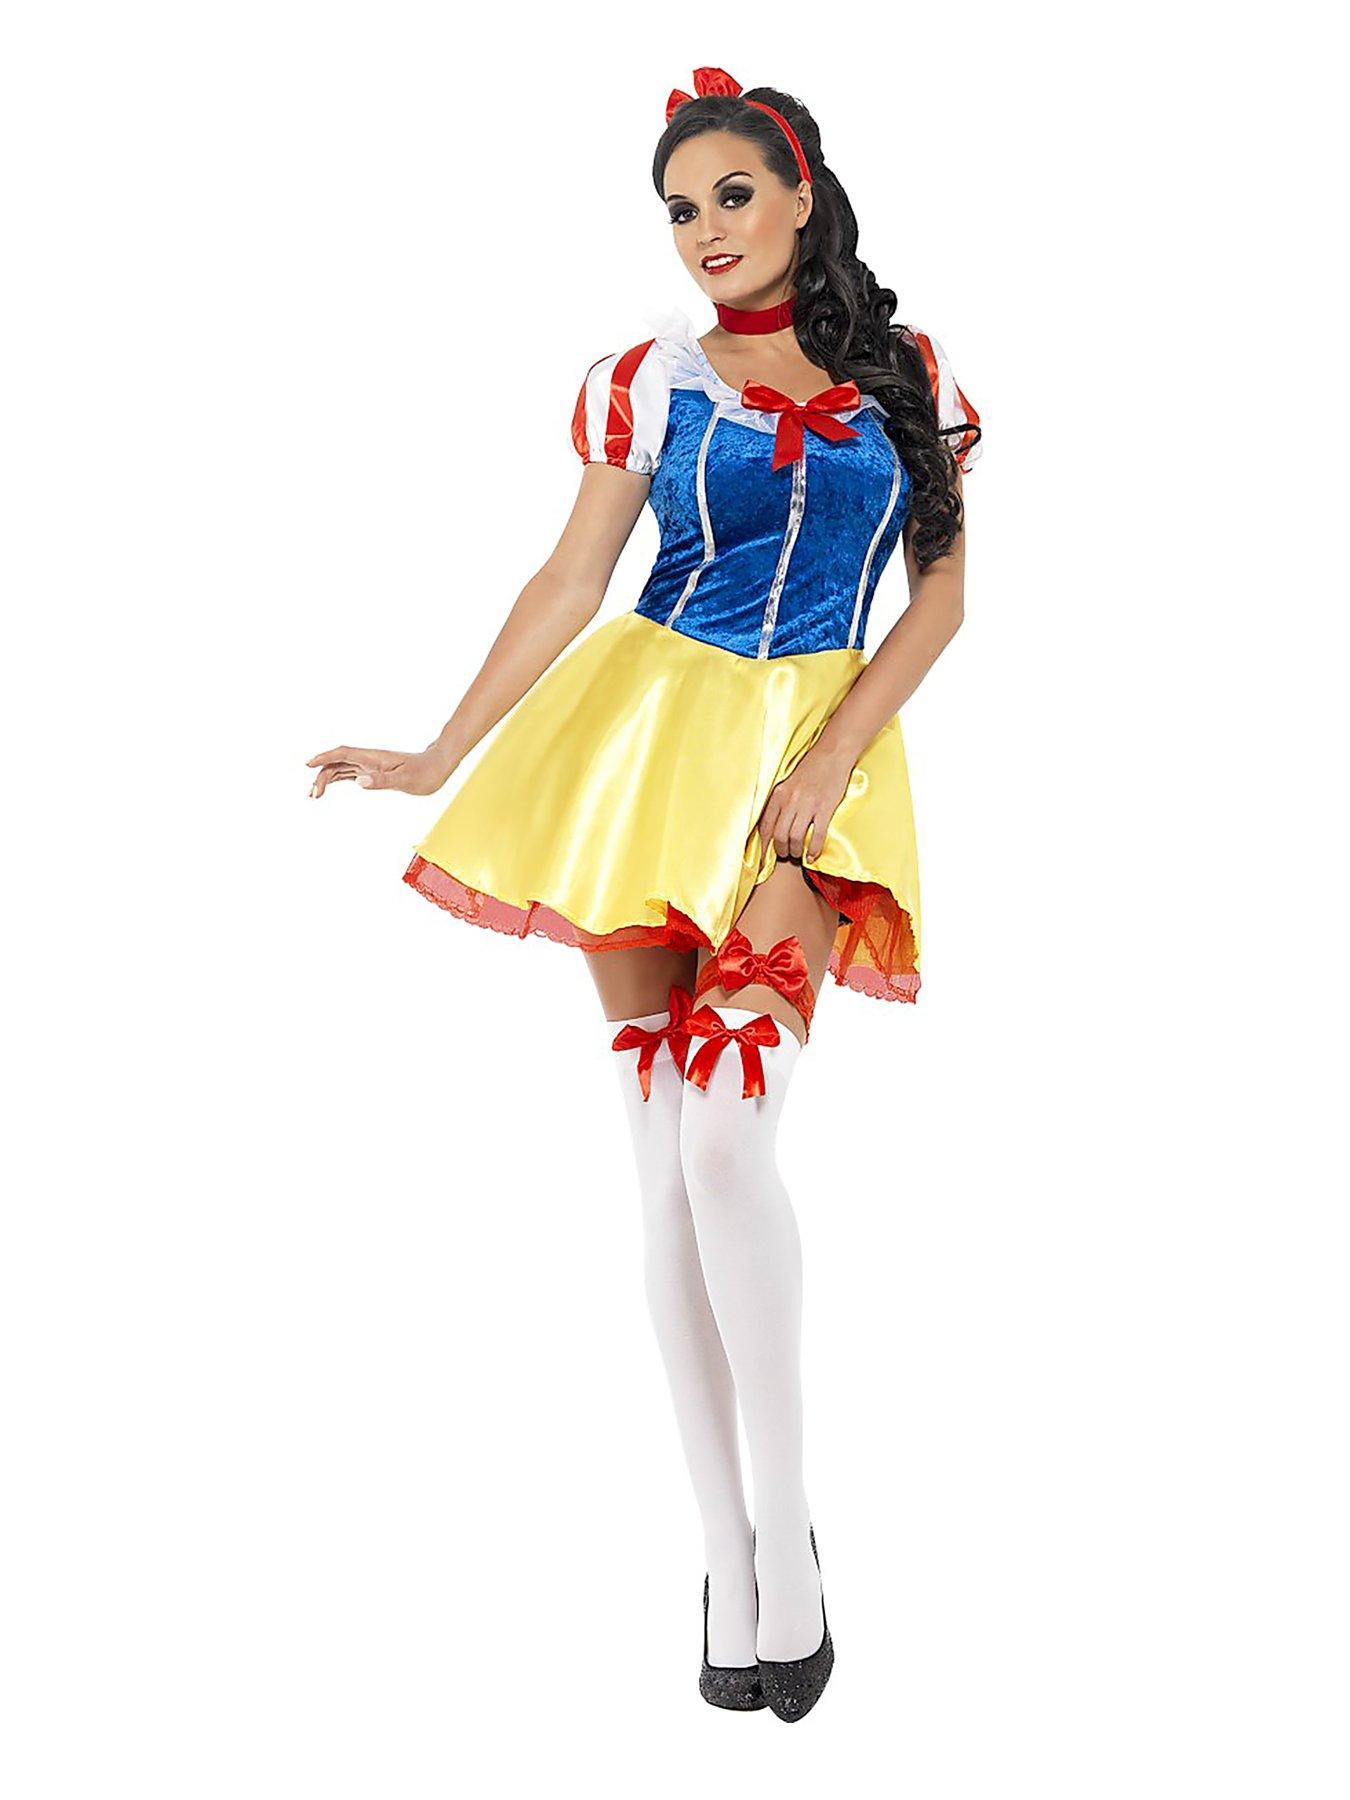 ITSMYCOSTUME Goa Girl Indian State Fancy Dress Costume For Kids at Rs 799 |  State's Costume in Noida | ID: 20787773655